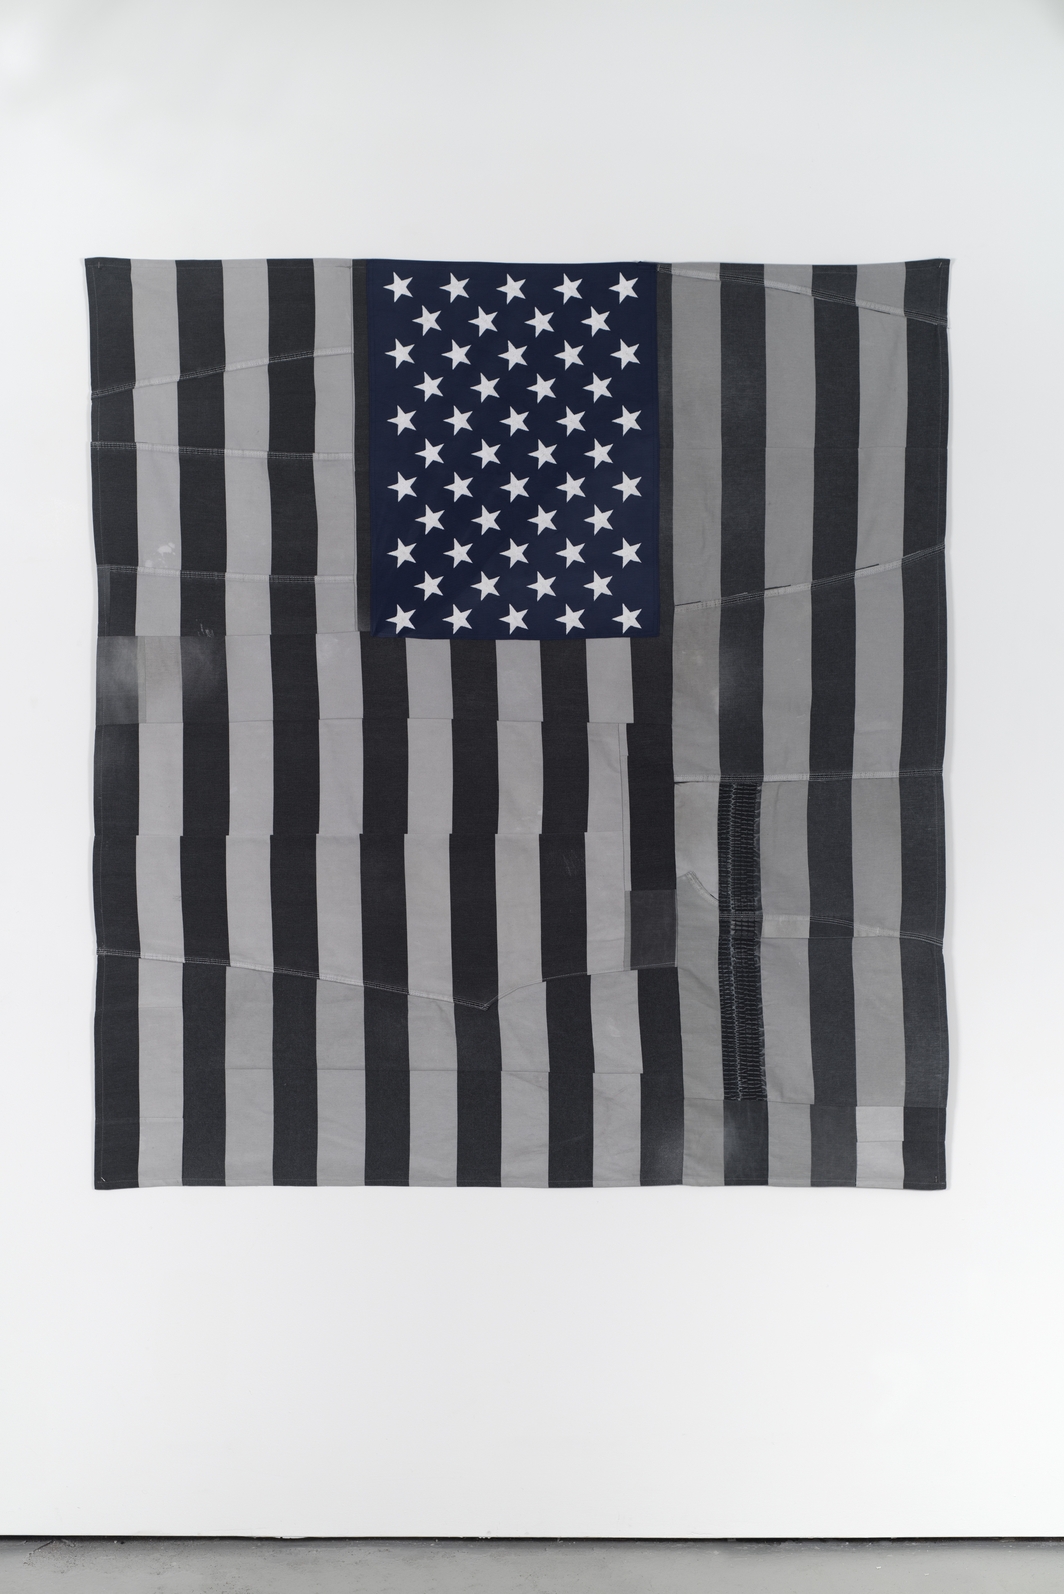 An American flag hangs on a wall that is made of striped prison uniforms